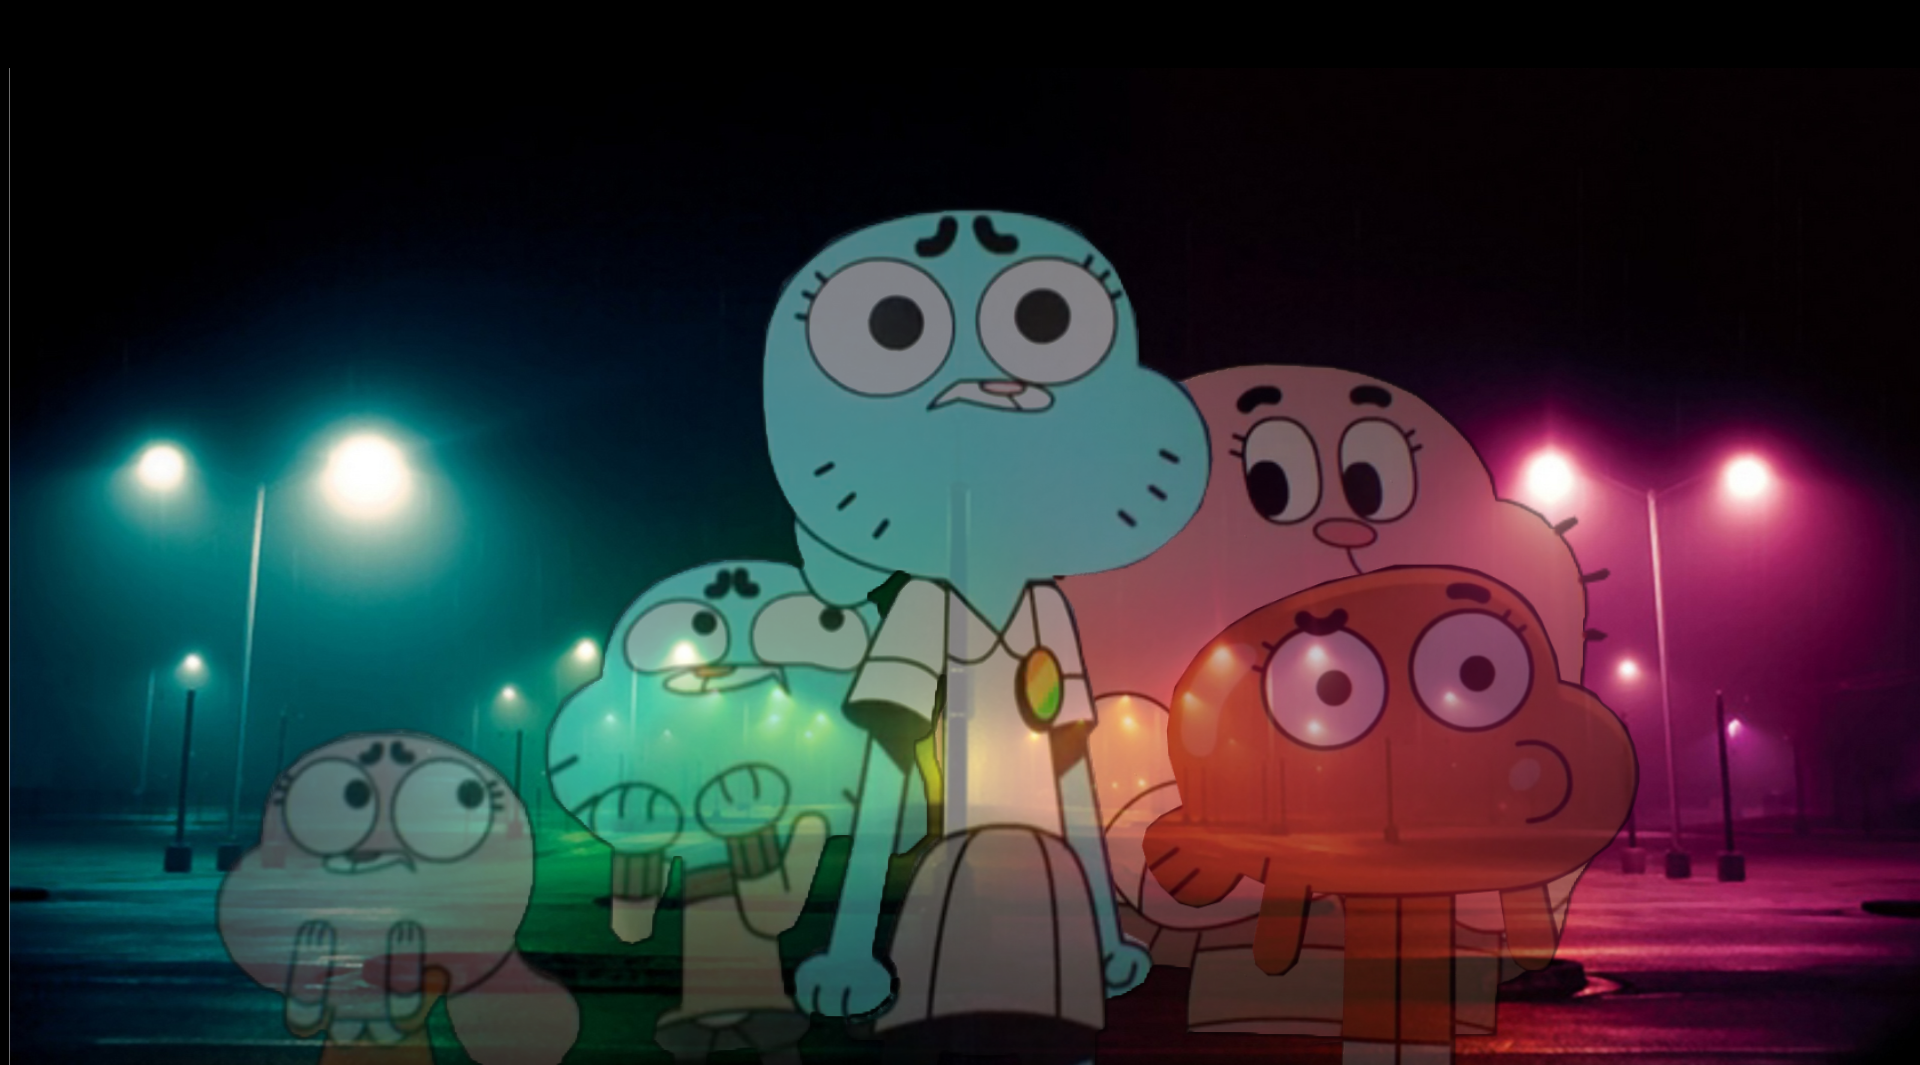 Best 56+ The Amazing World of Gumball Wallpapers on HipWallpapers.